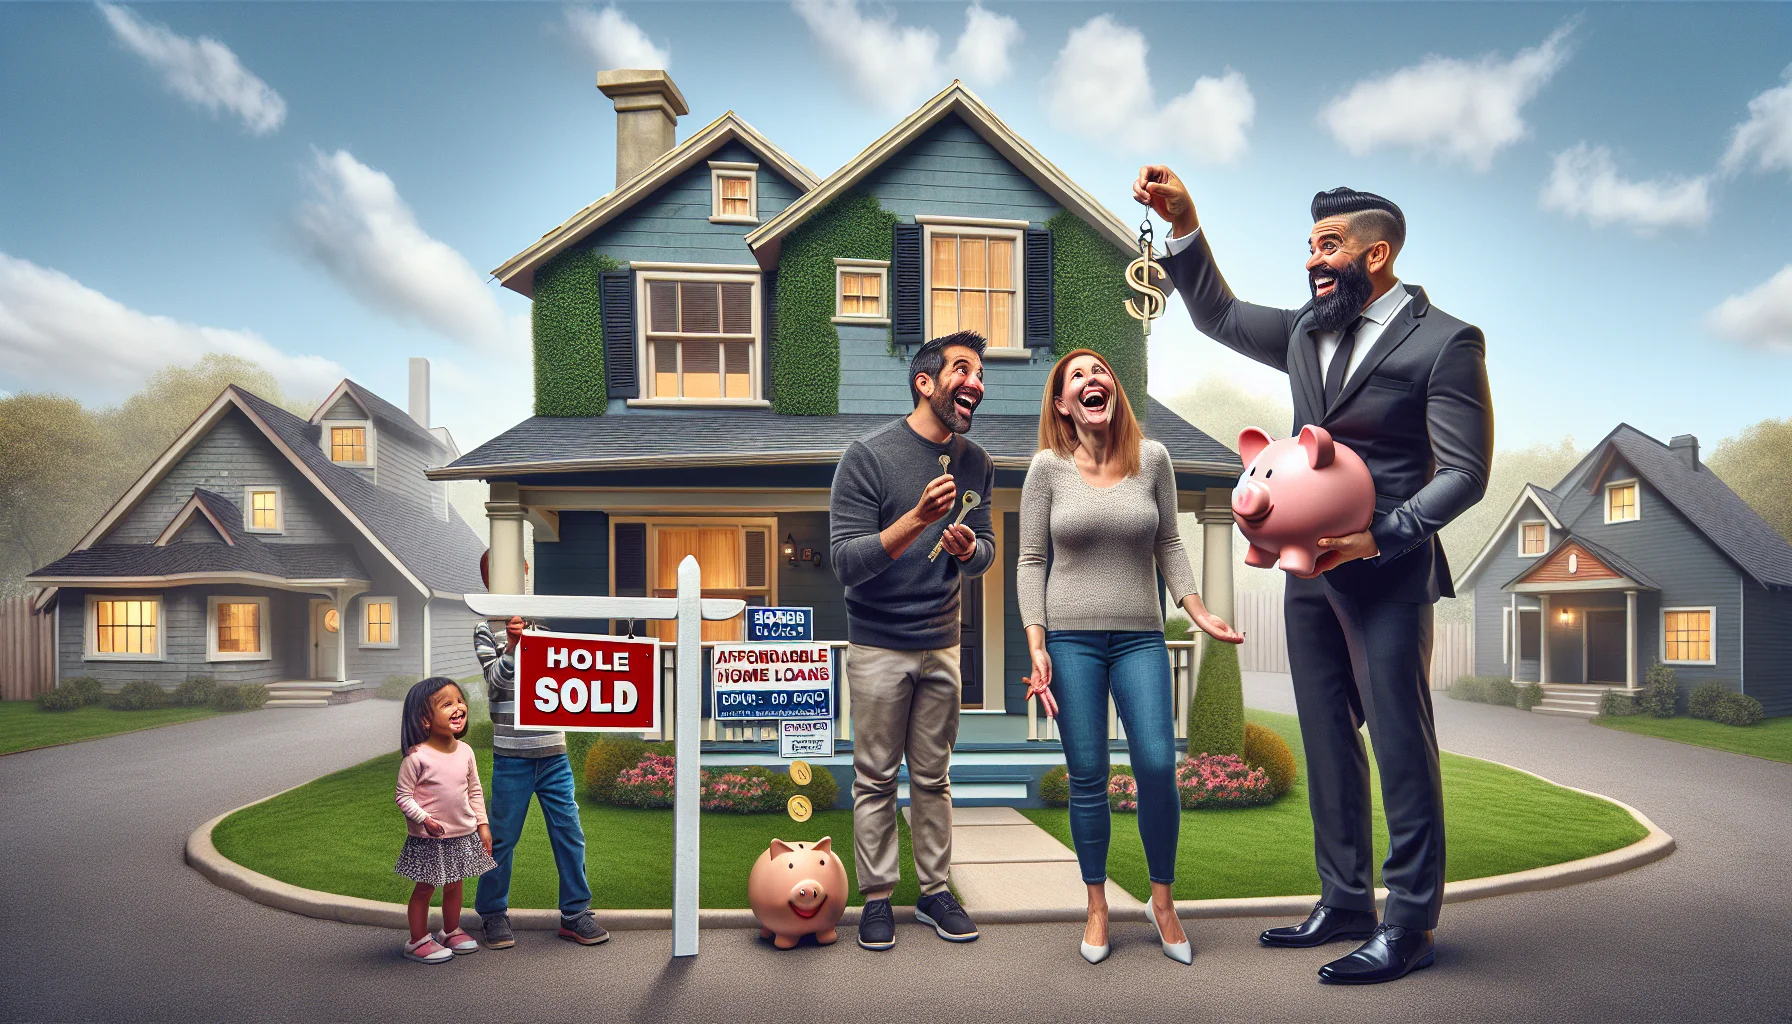 Create a humorous and realistic image showcasing the ideal scenario in real estate. Envision a small family standing outside a newly bought quaint house with an exaggeratedly oversized 'Sold' sign on the neatly manicured lawn. They hold keys in their hands, and a giant dollar sign dropping into a piggy bank, symbolizing affordable home loans. The father is a Middle-Eastern man, the mother is a Hispanic woman and their child is a little girl. They are laughing while a real estate agent, a black male, happily hands them the keys. The background is a quiet suburban street, filled with similar homes.